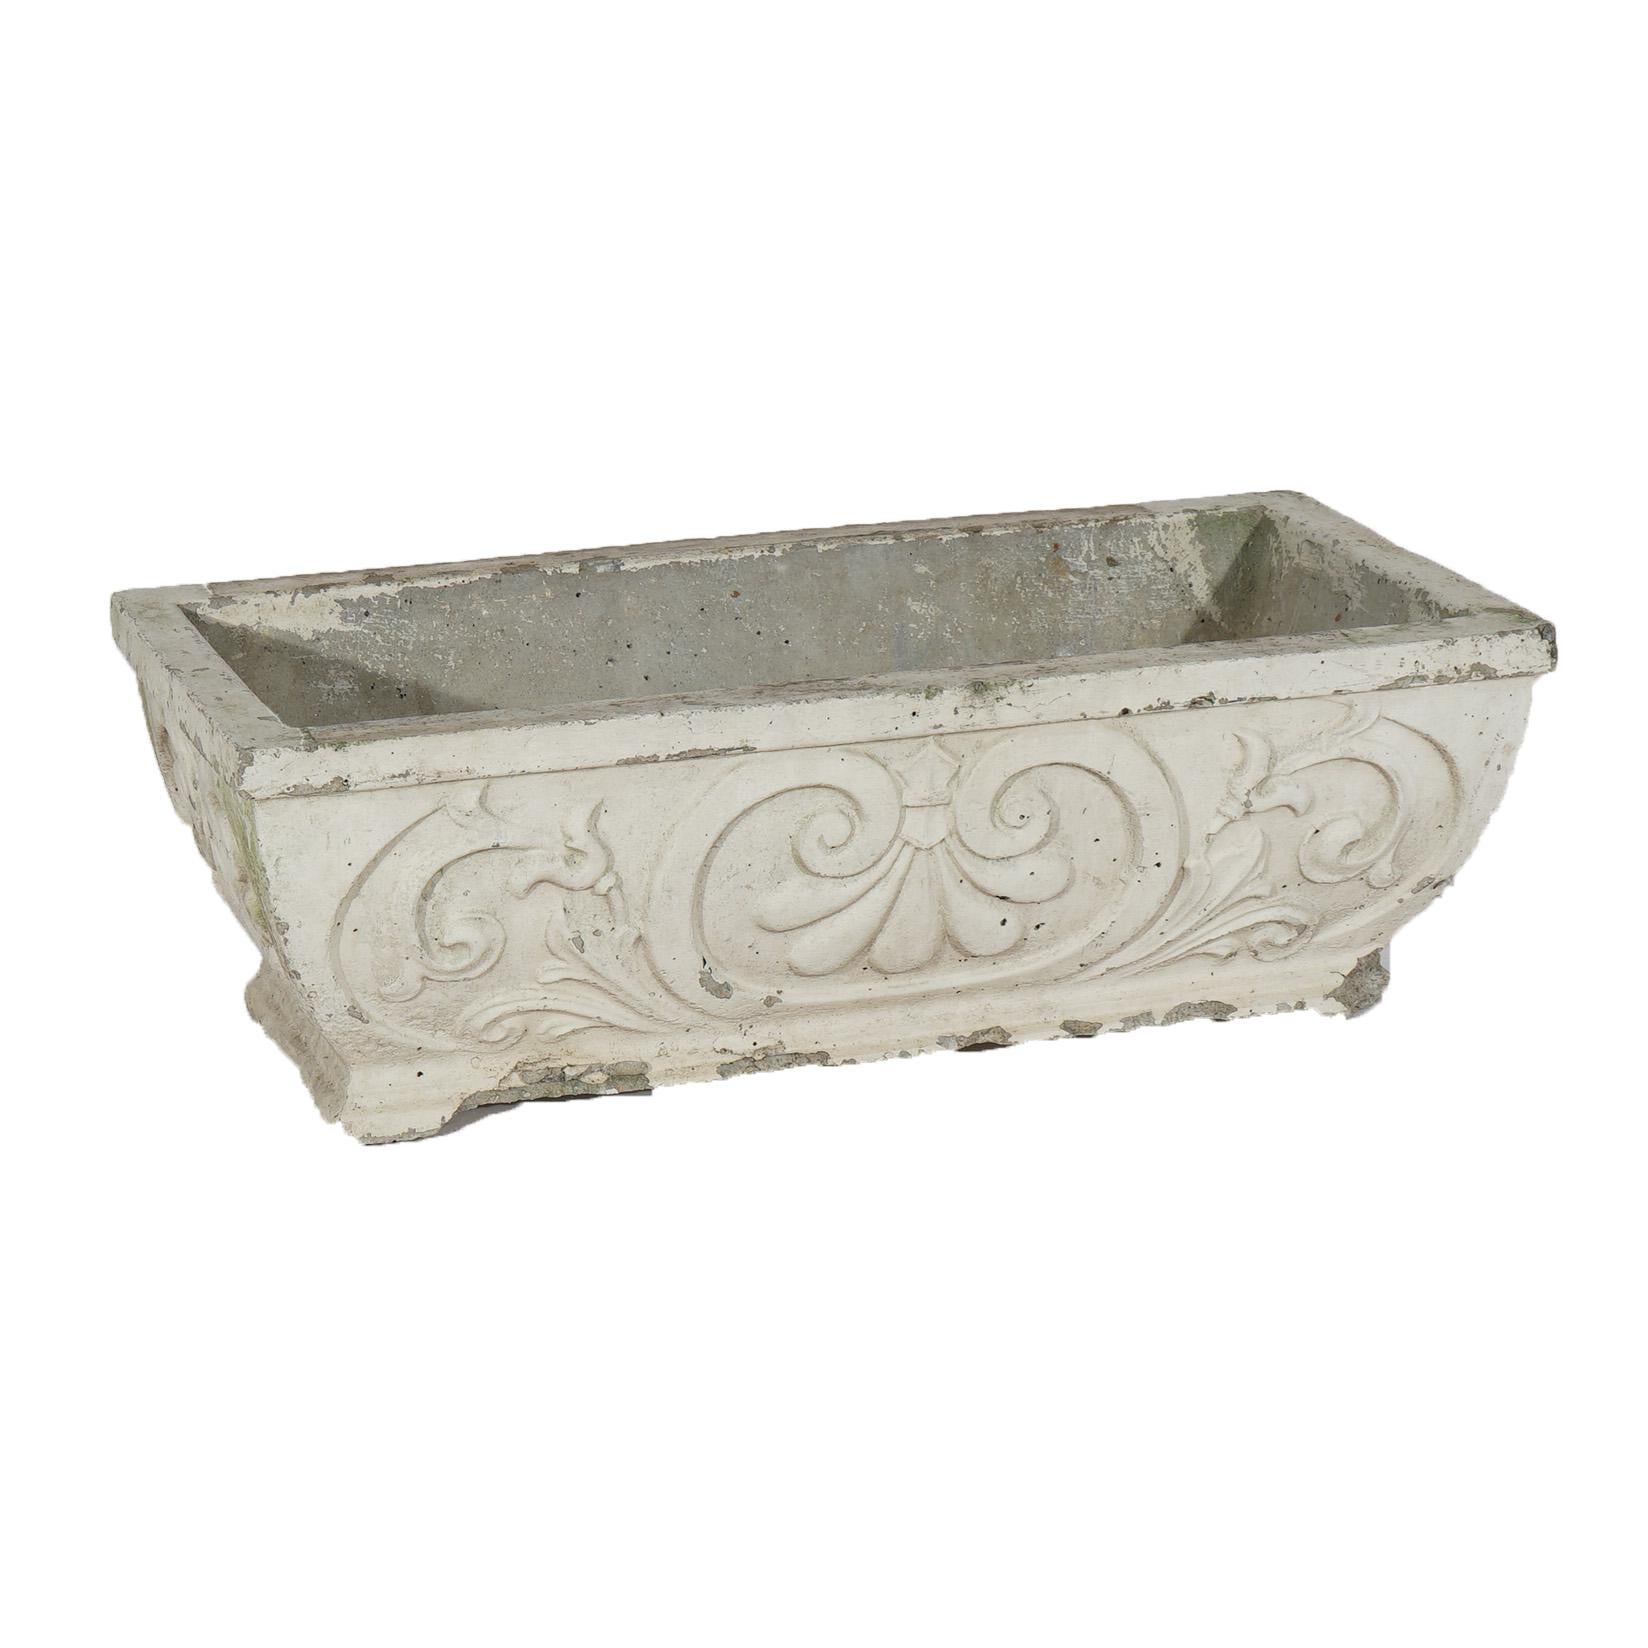 20th Century Cast Hardstone Long Garden or Patio Planter with Scroll Work in Relief 20th C For Sale